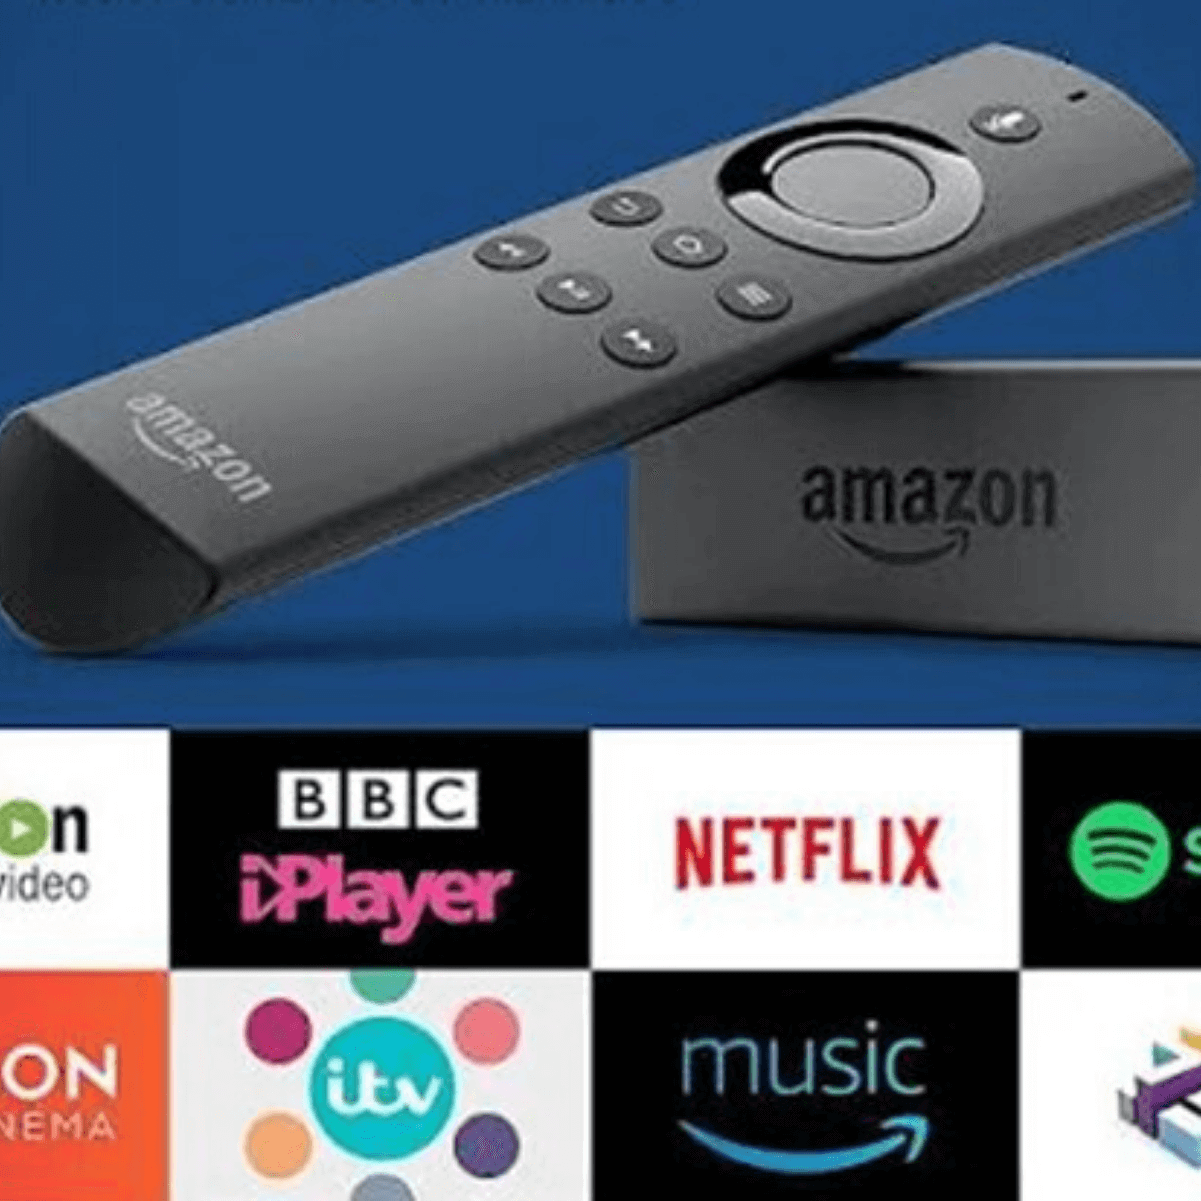 what programmes are on amazon fire stick